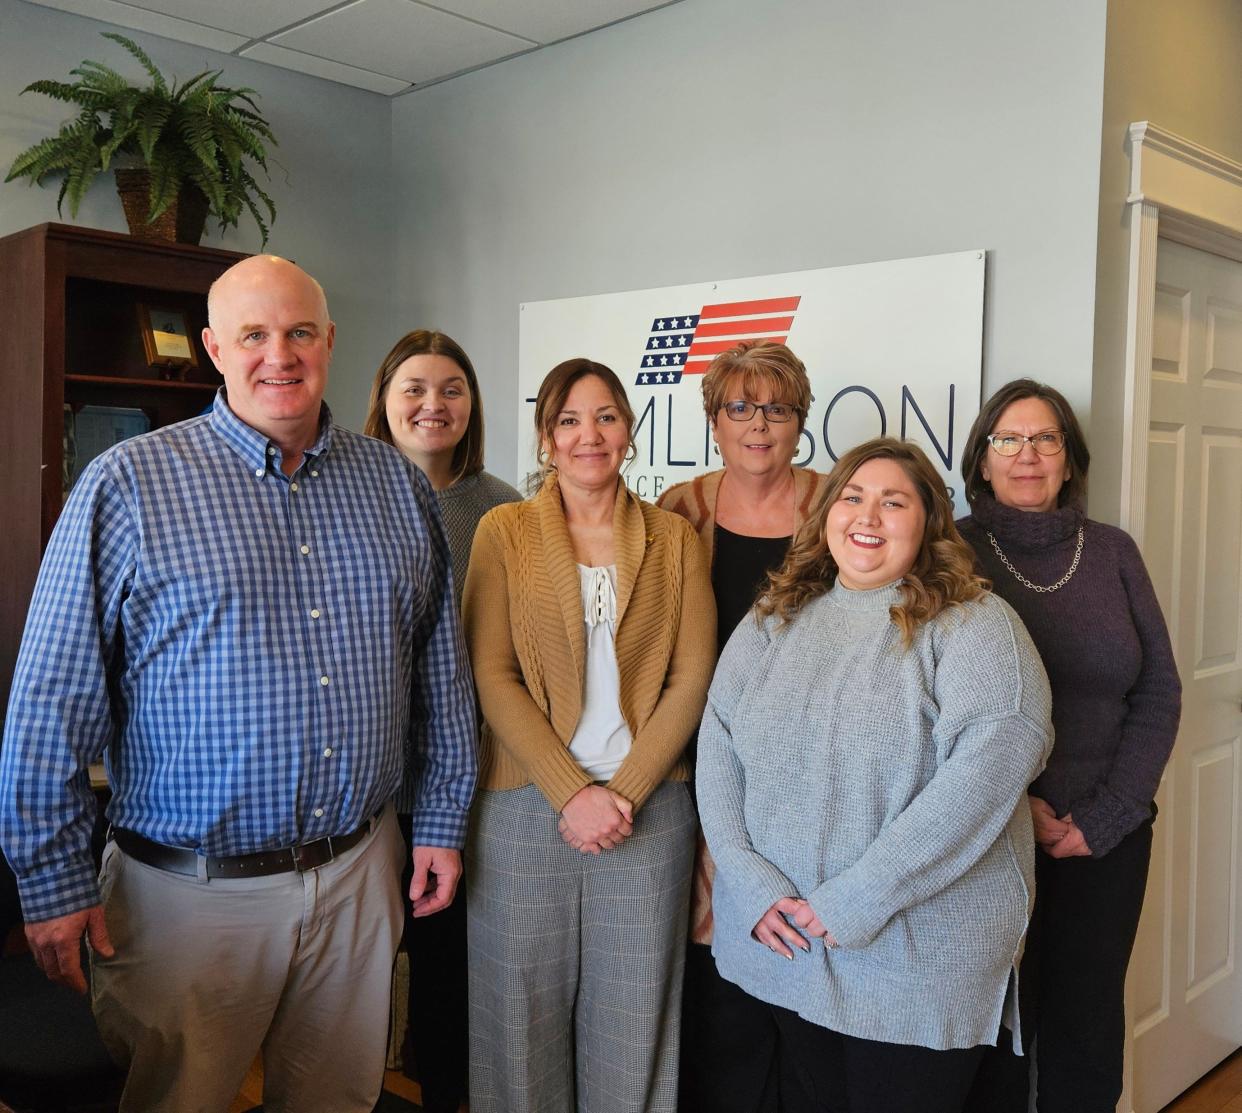 Tomlinson Insurance in Chillicothe recently took over the accounts of Gustin Insurance Agency.